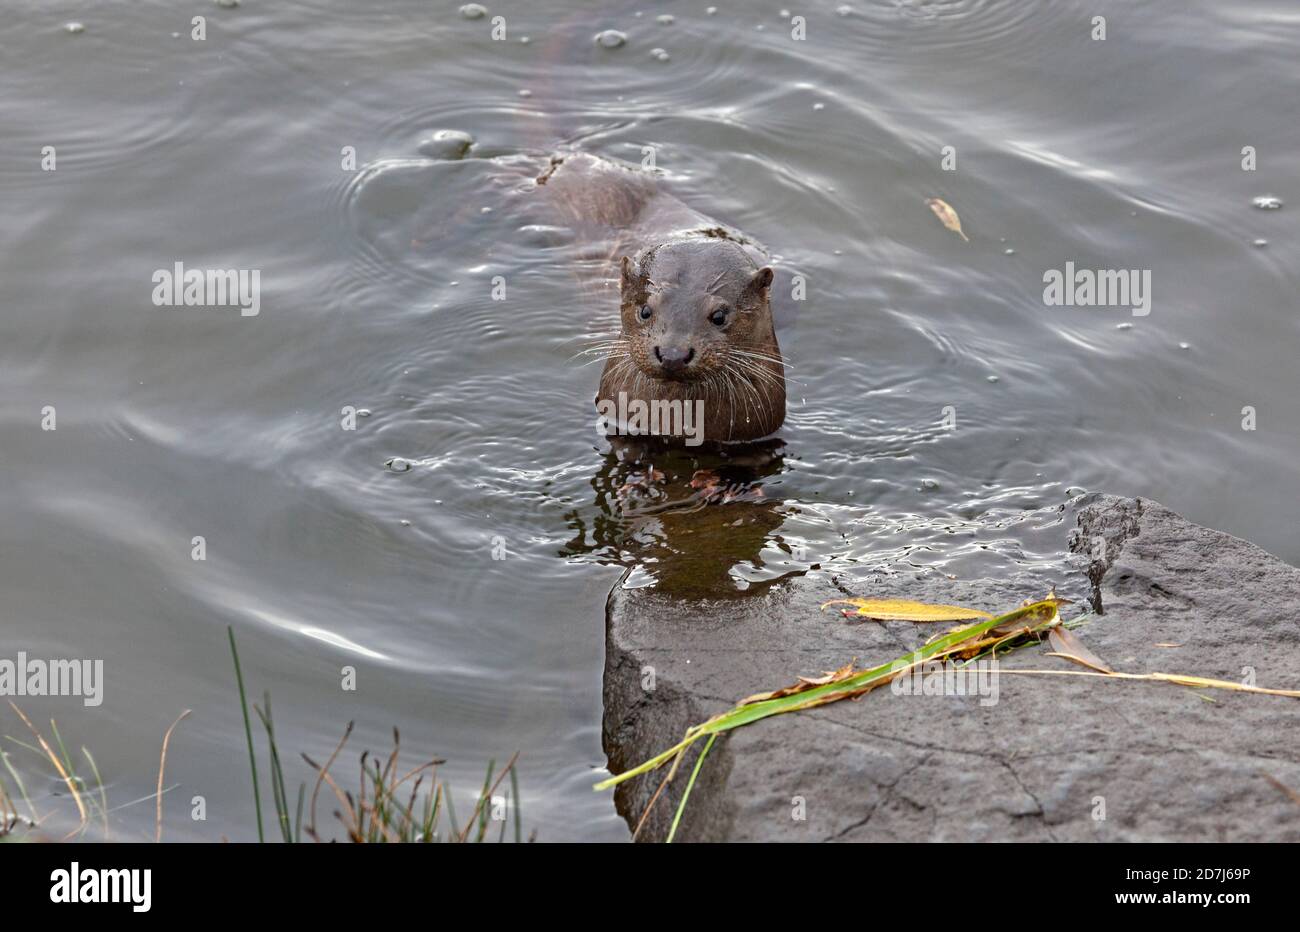 Holyrood Park, Edinburgh, Scotland, UK. 23 October 2020. Young otter has been attracting wildlife watchers as it made an appearance again in Dunsapie Loch one of the three lochs situated in Holyrood Park. Stock Photo